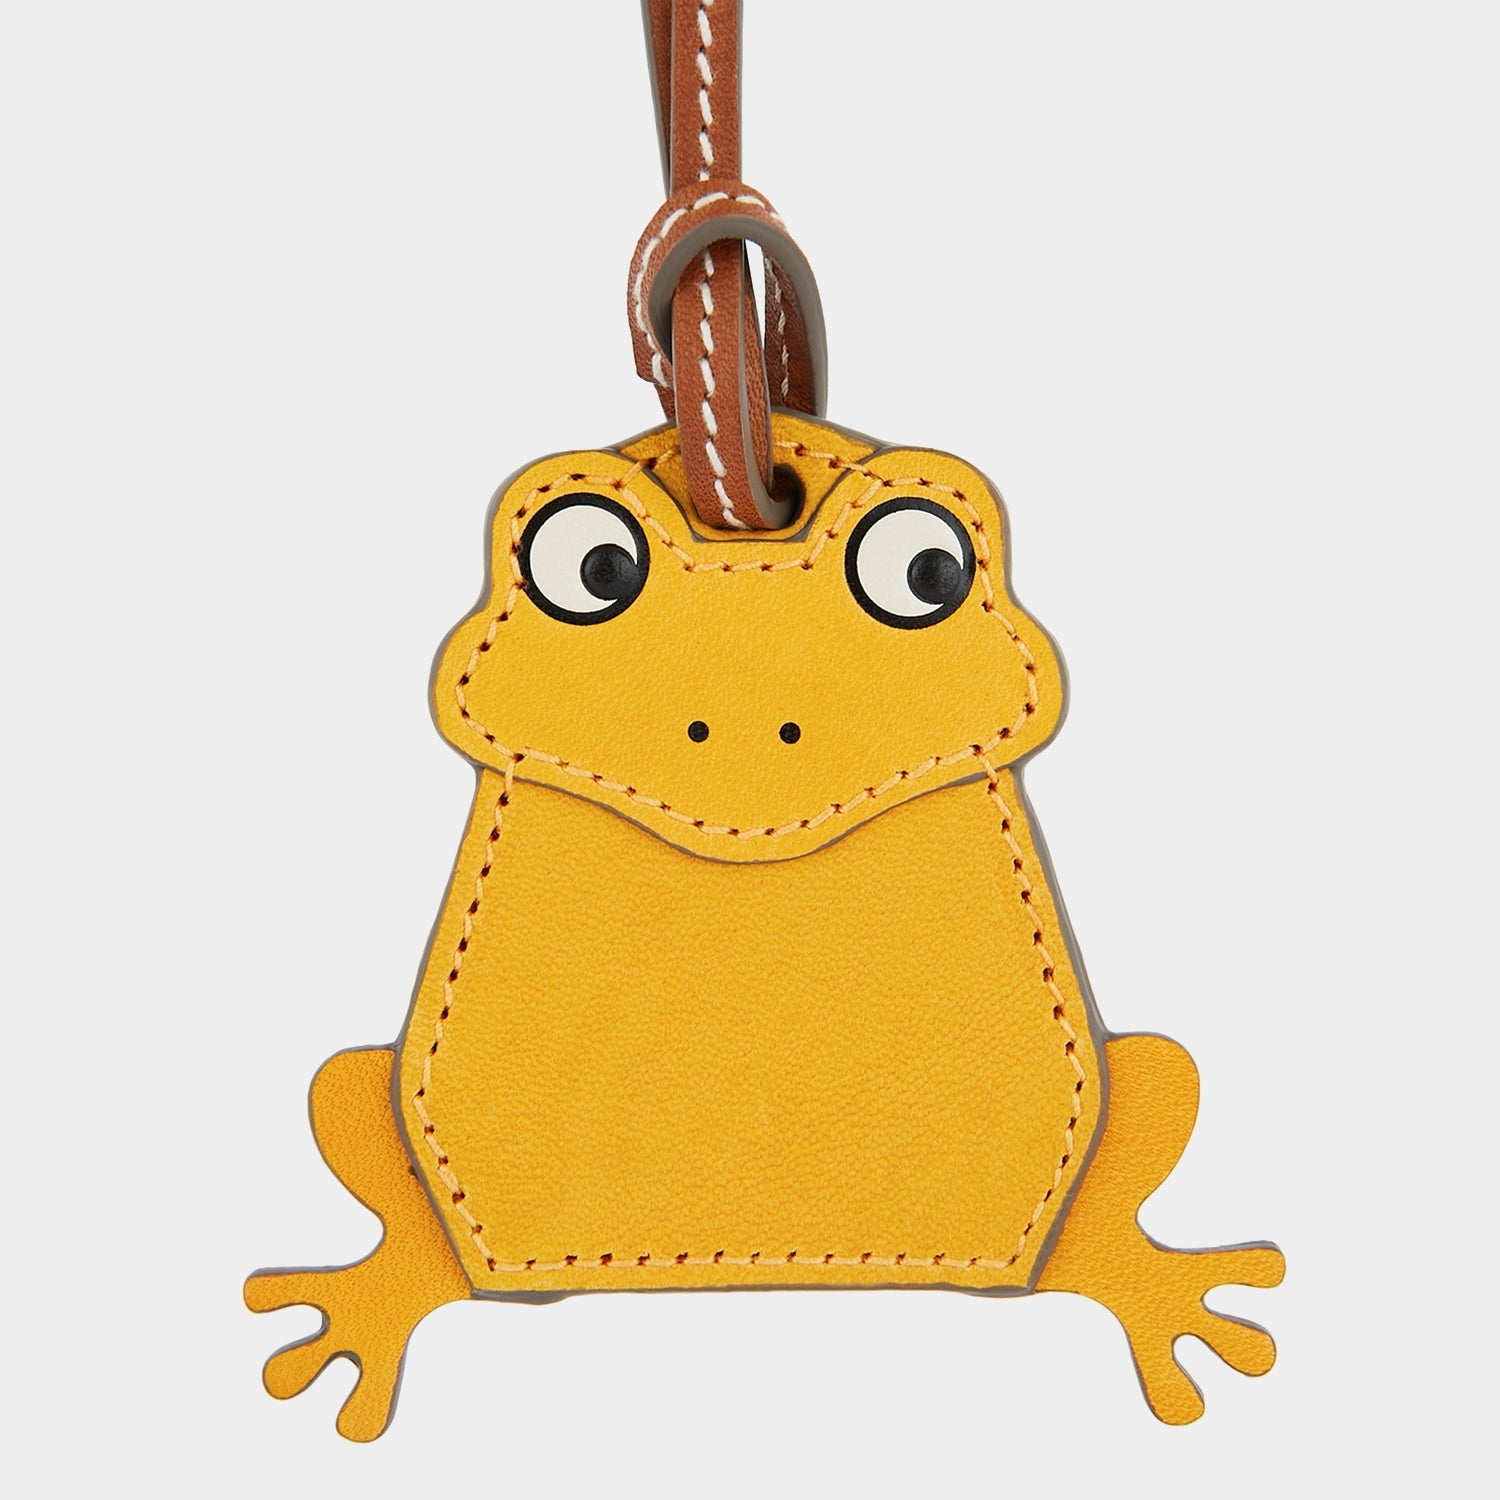 Return to Nature Frog Charm